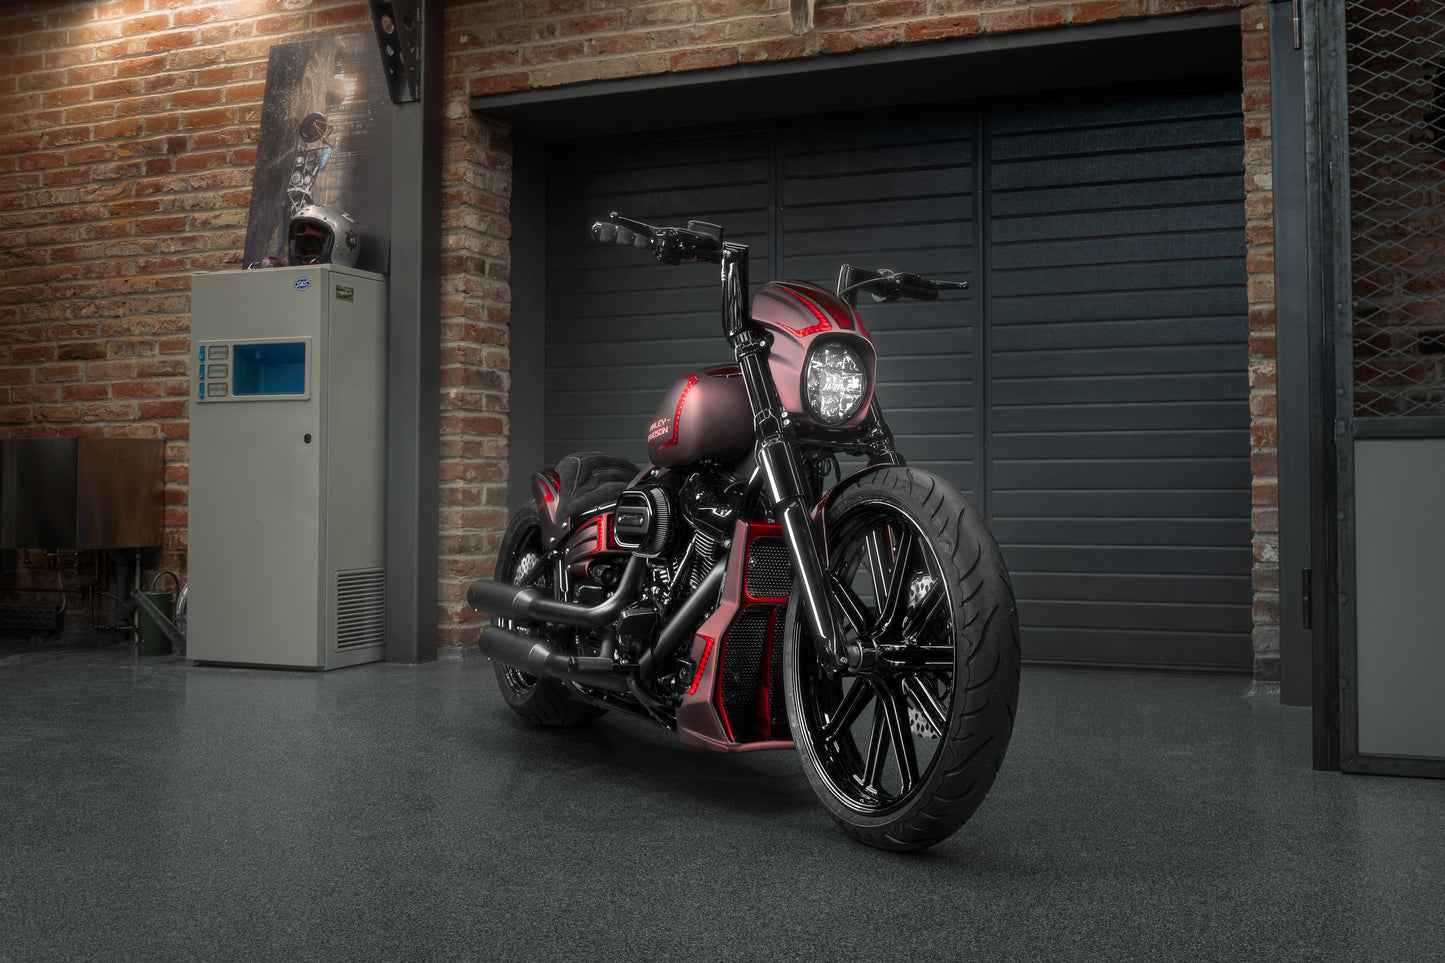 Harley Davidson motorcycle with Killer Custom "Killer Bull' fat handlebars from the front in an industrial environment